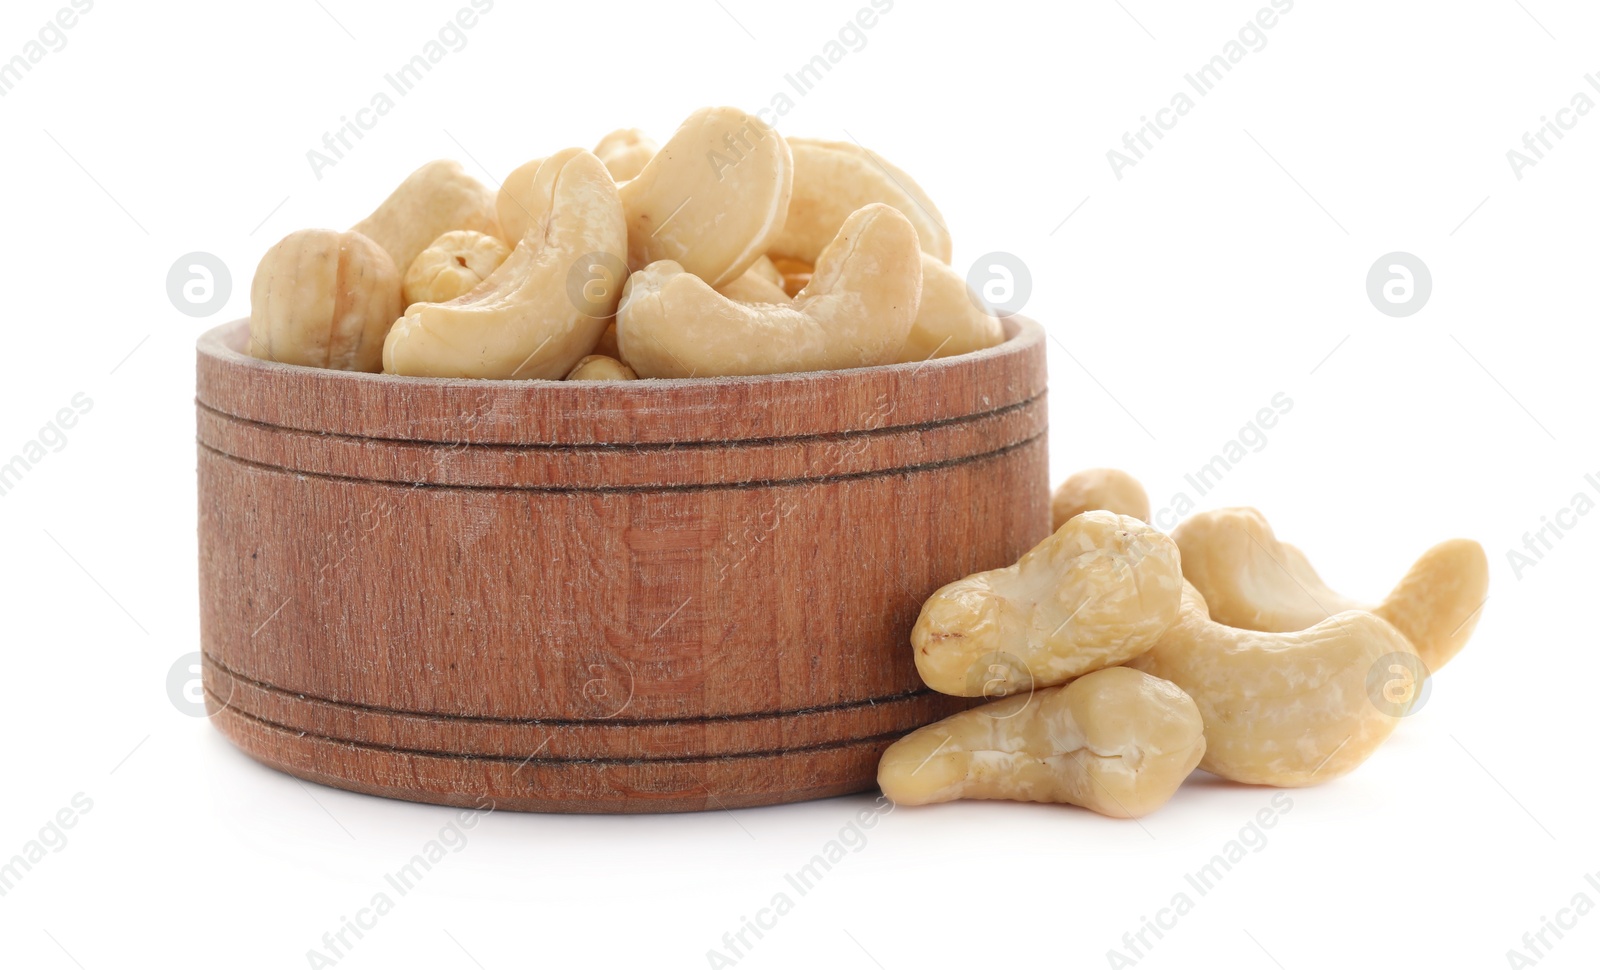 Photo of Bowl and tasty organic cashew nuts isolated on white